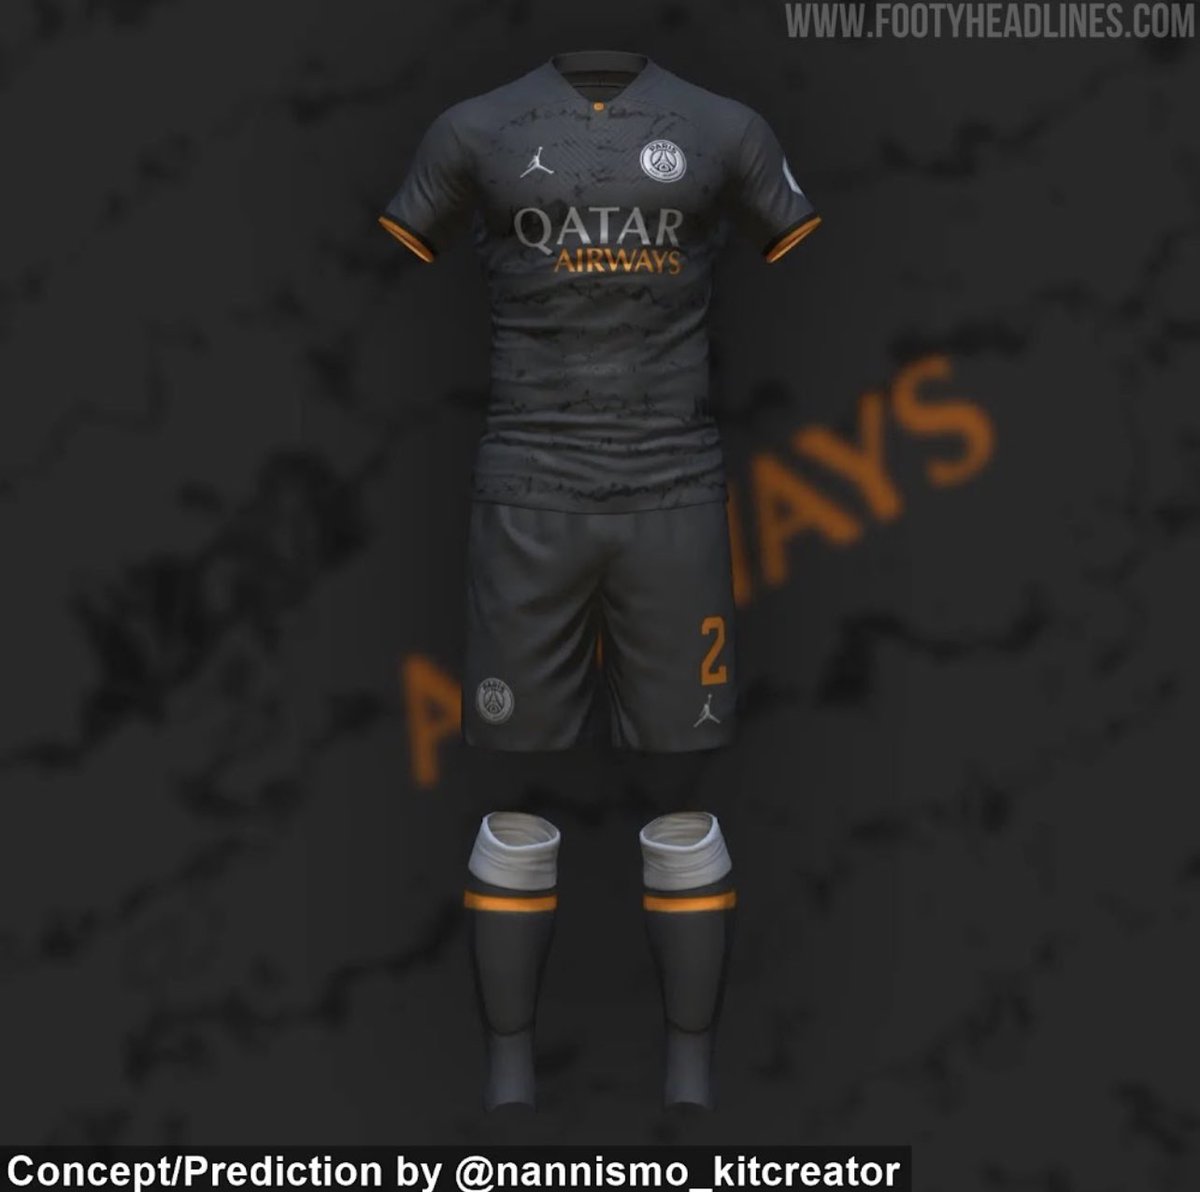 RT @PSG_Report: PSG’s 23-24 third kit could look like this: [@Footy_Headlines] https://t.co/gvkWzIuFBI